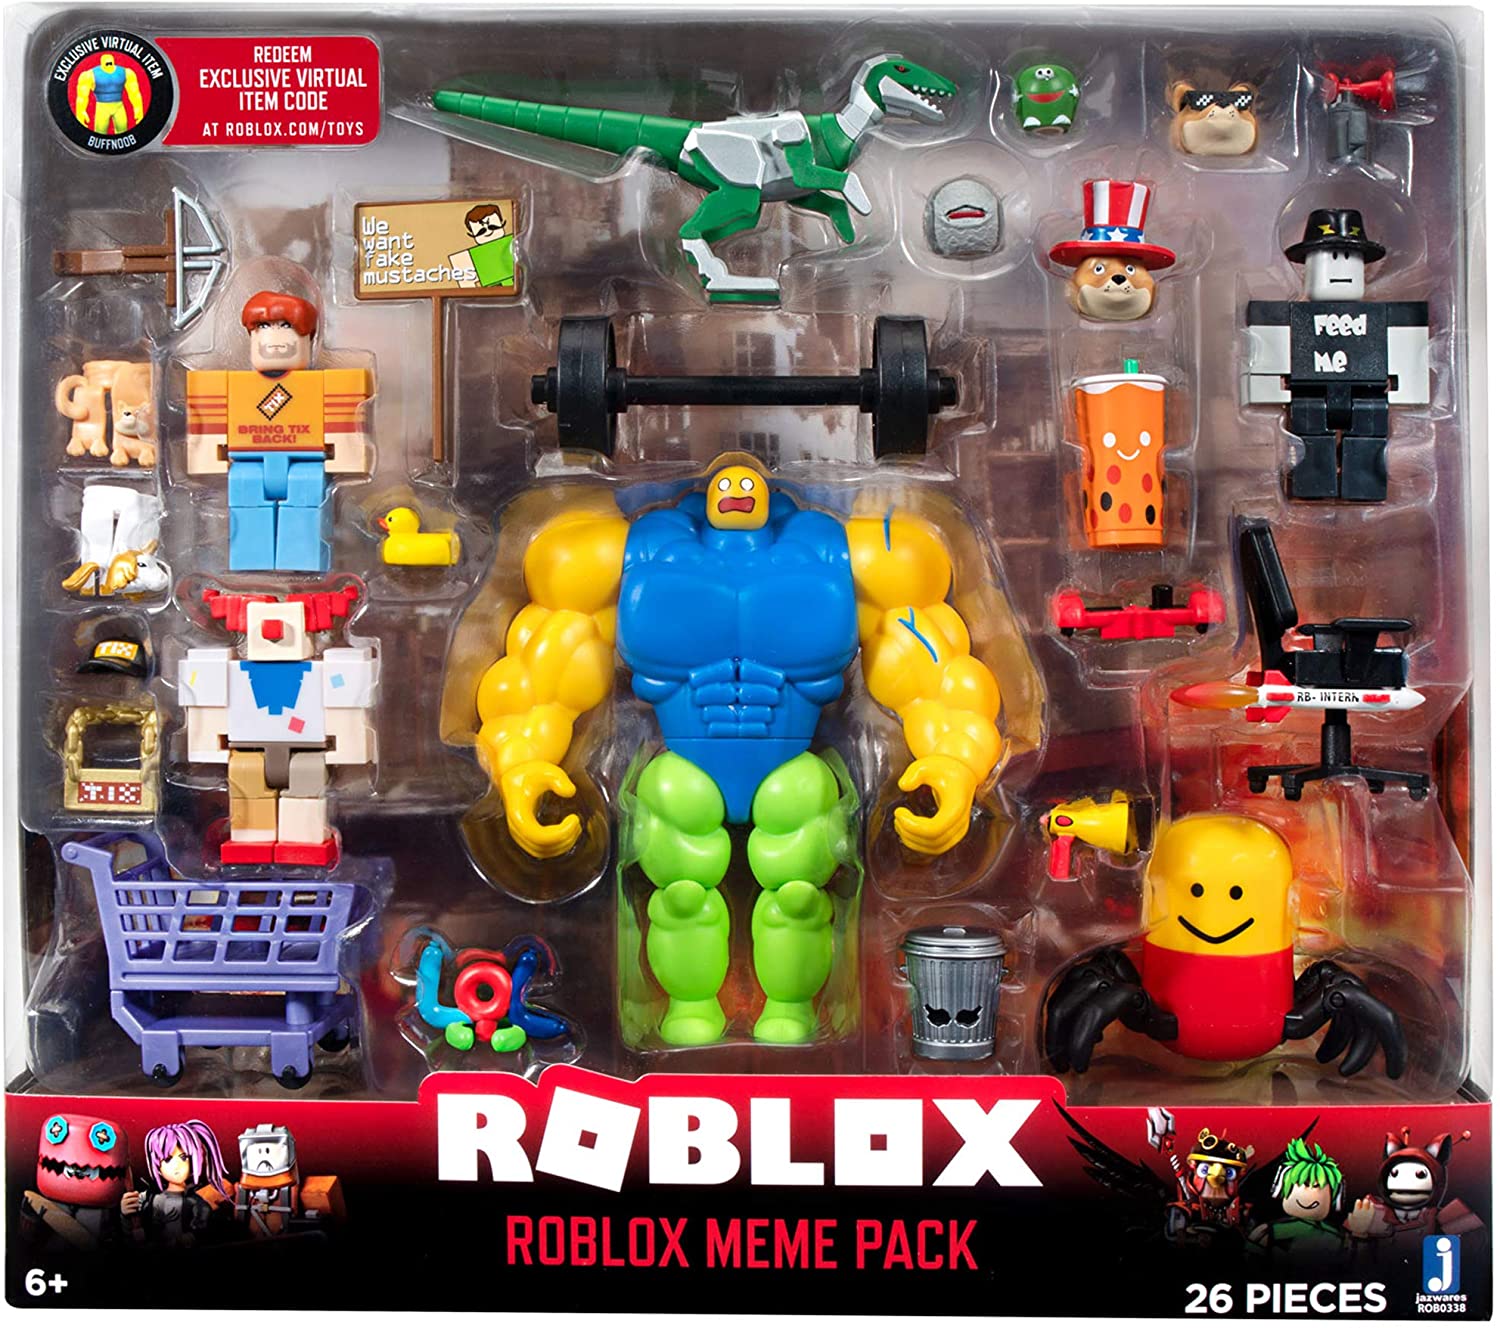 Dueldroid 5000 With Virtual Game Code Accessories Roblox Toys Action Figures Tv Movie Video Games Djroncarpenito Toys Hobbies - jow to make a block removeable in roblox